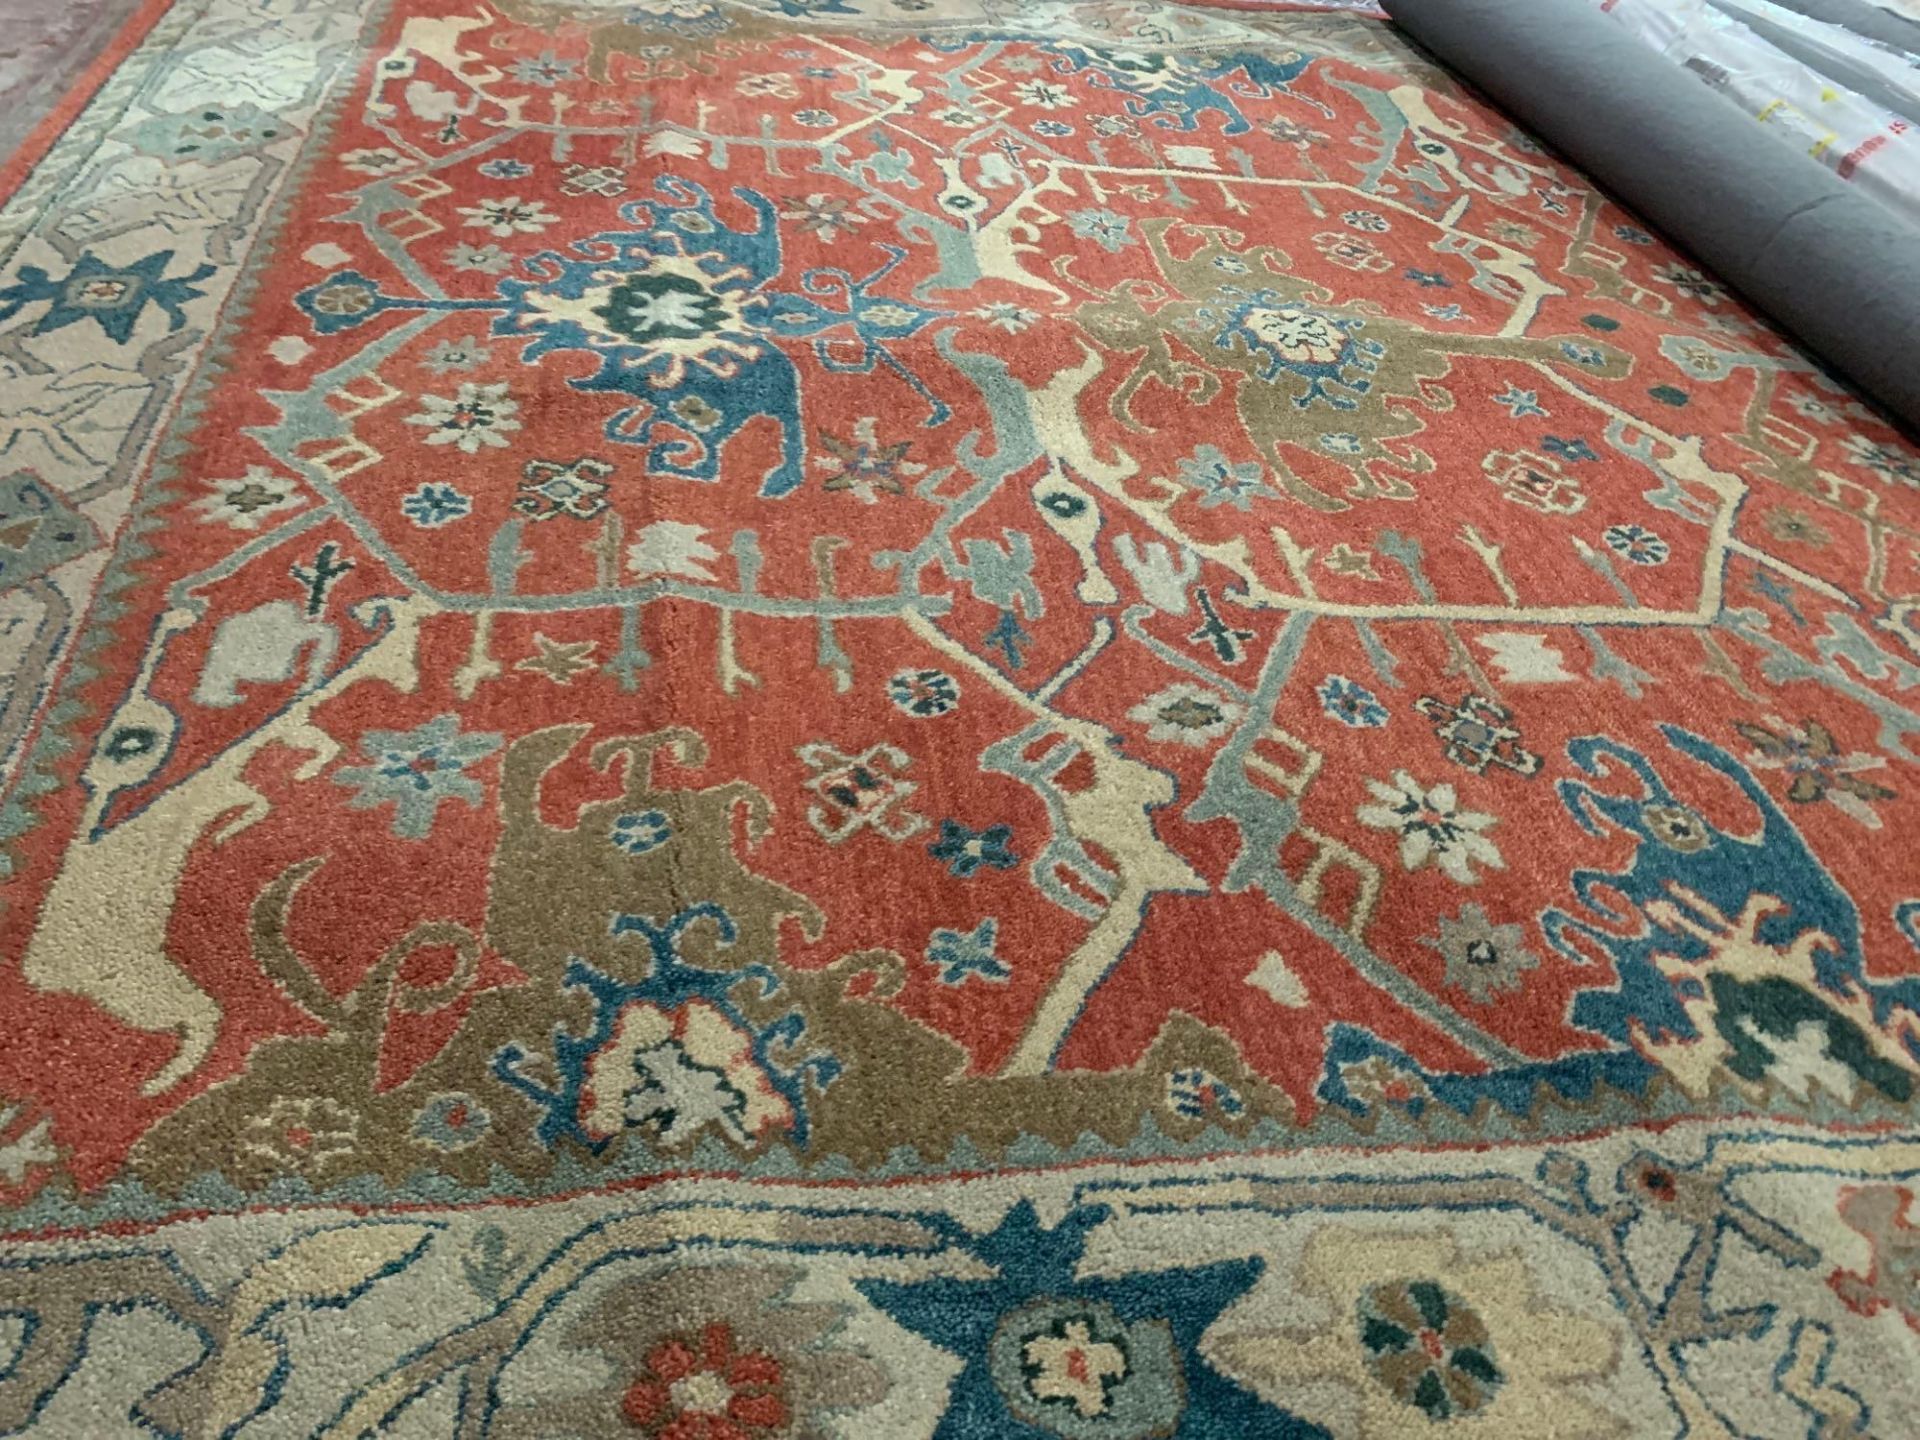 Traditional Persian Area Rug A Stunning Repeating Pattern 100% Wool Hand Tufted Rug Vibrant In - Image 8 of 8